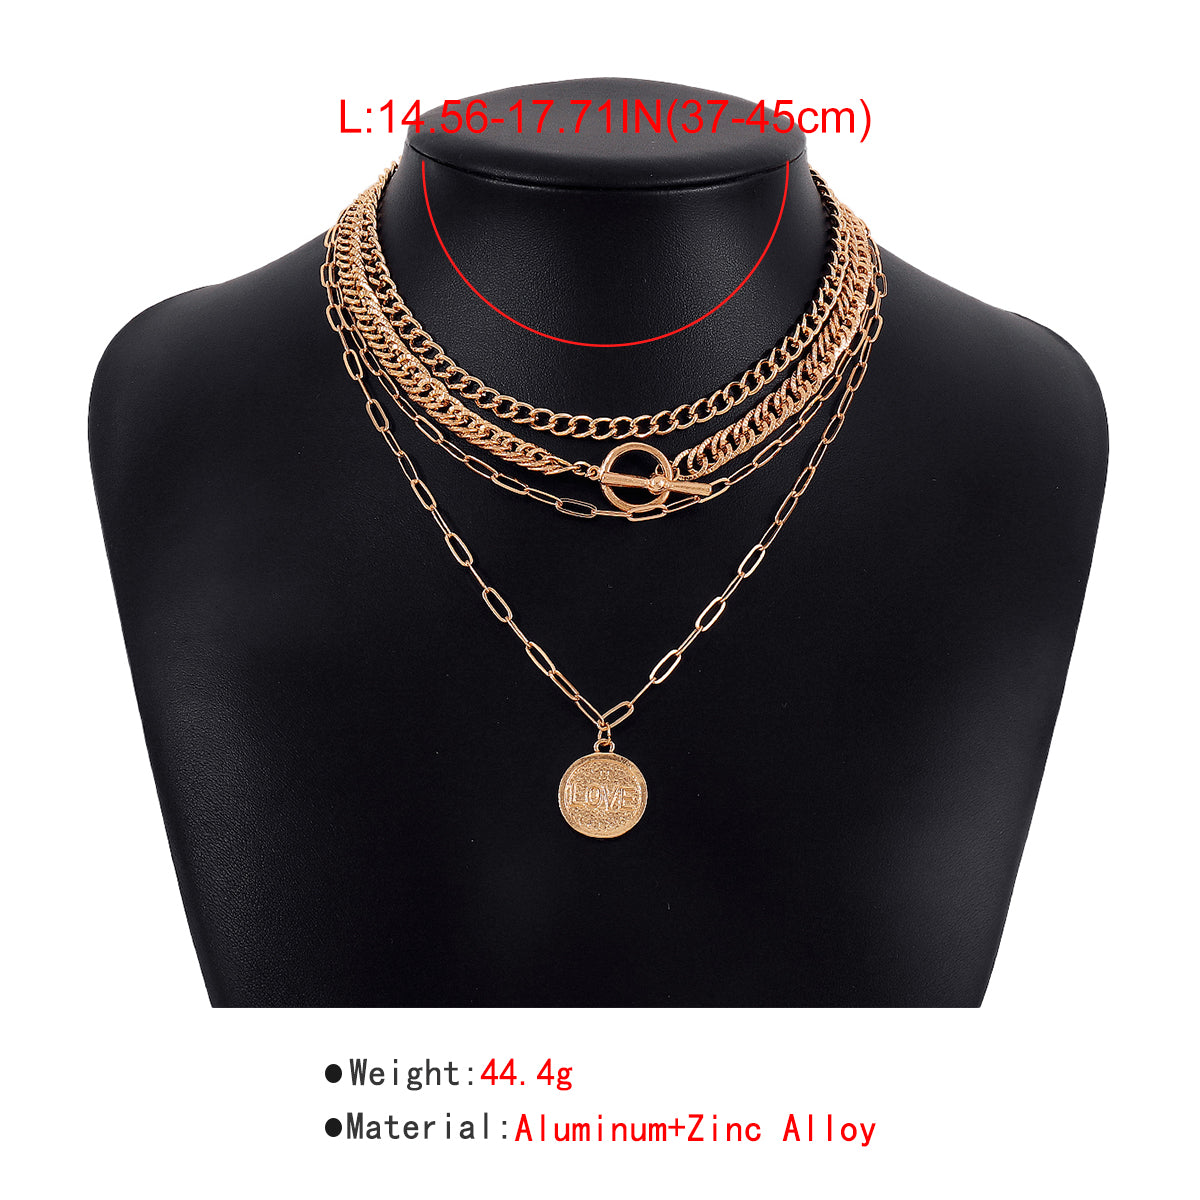 Multi-Strand Carved LOVE Pendant Toggle Necklaces medyjewelry